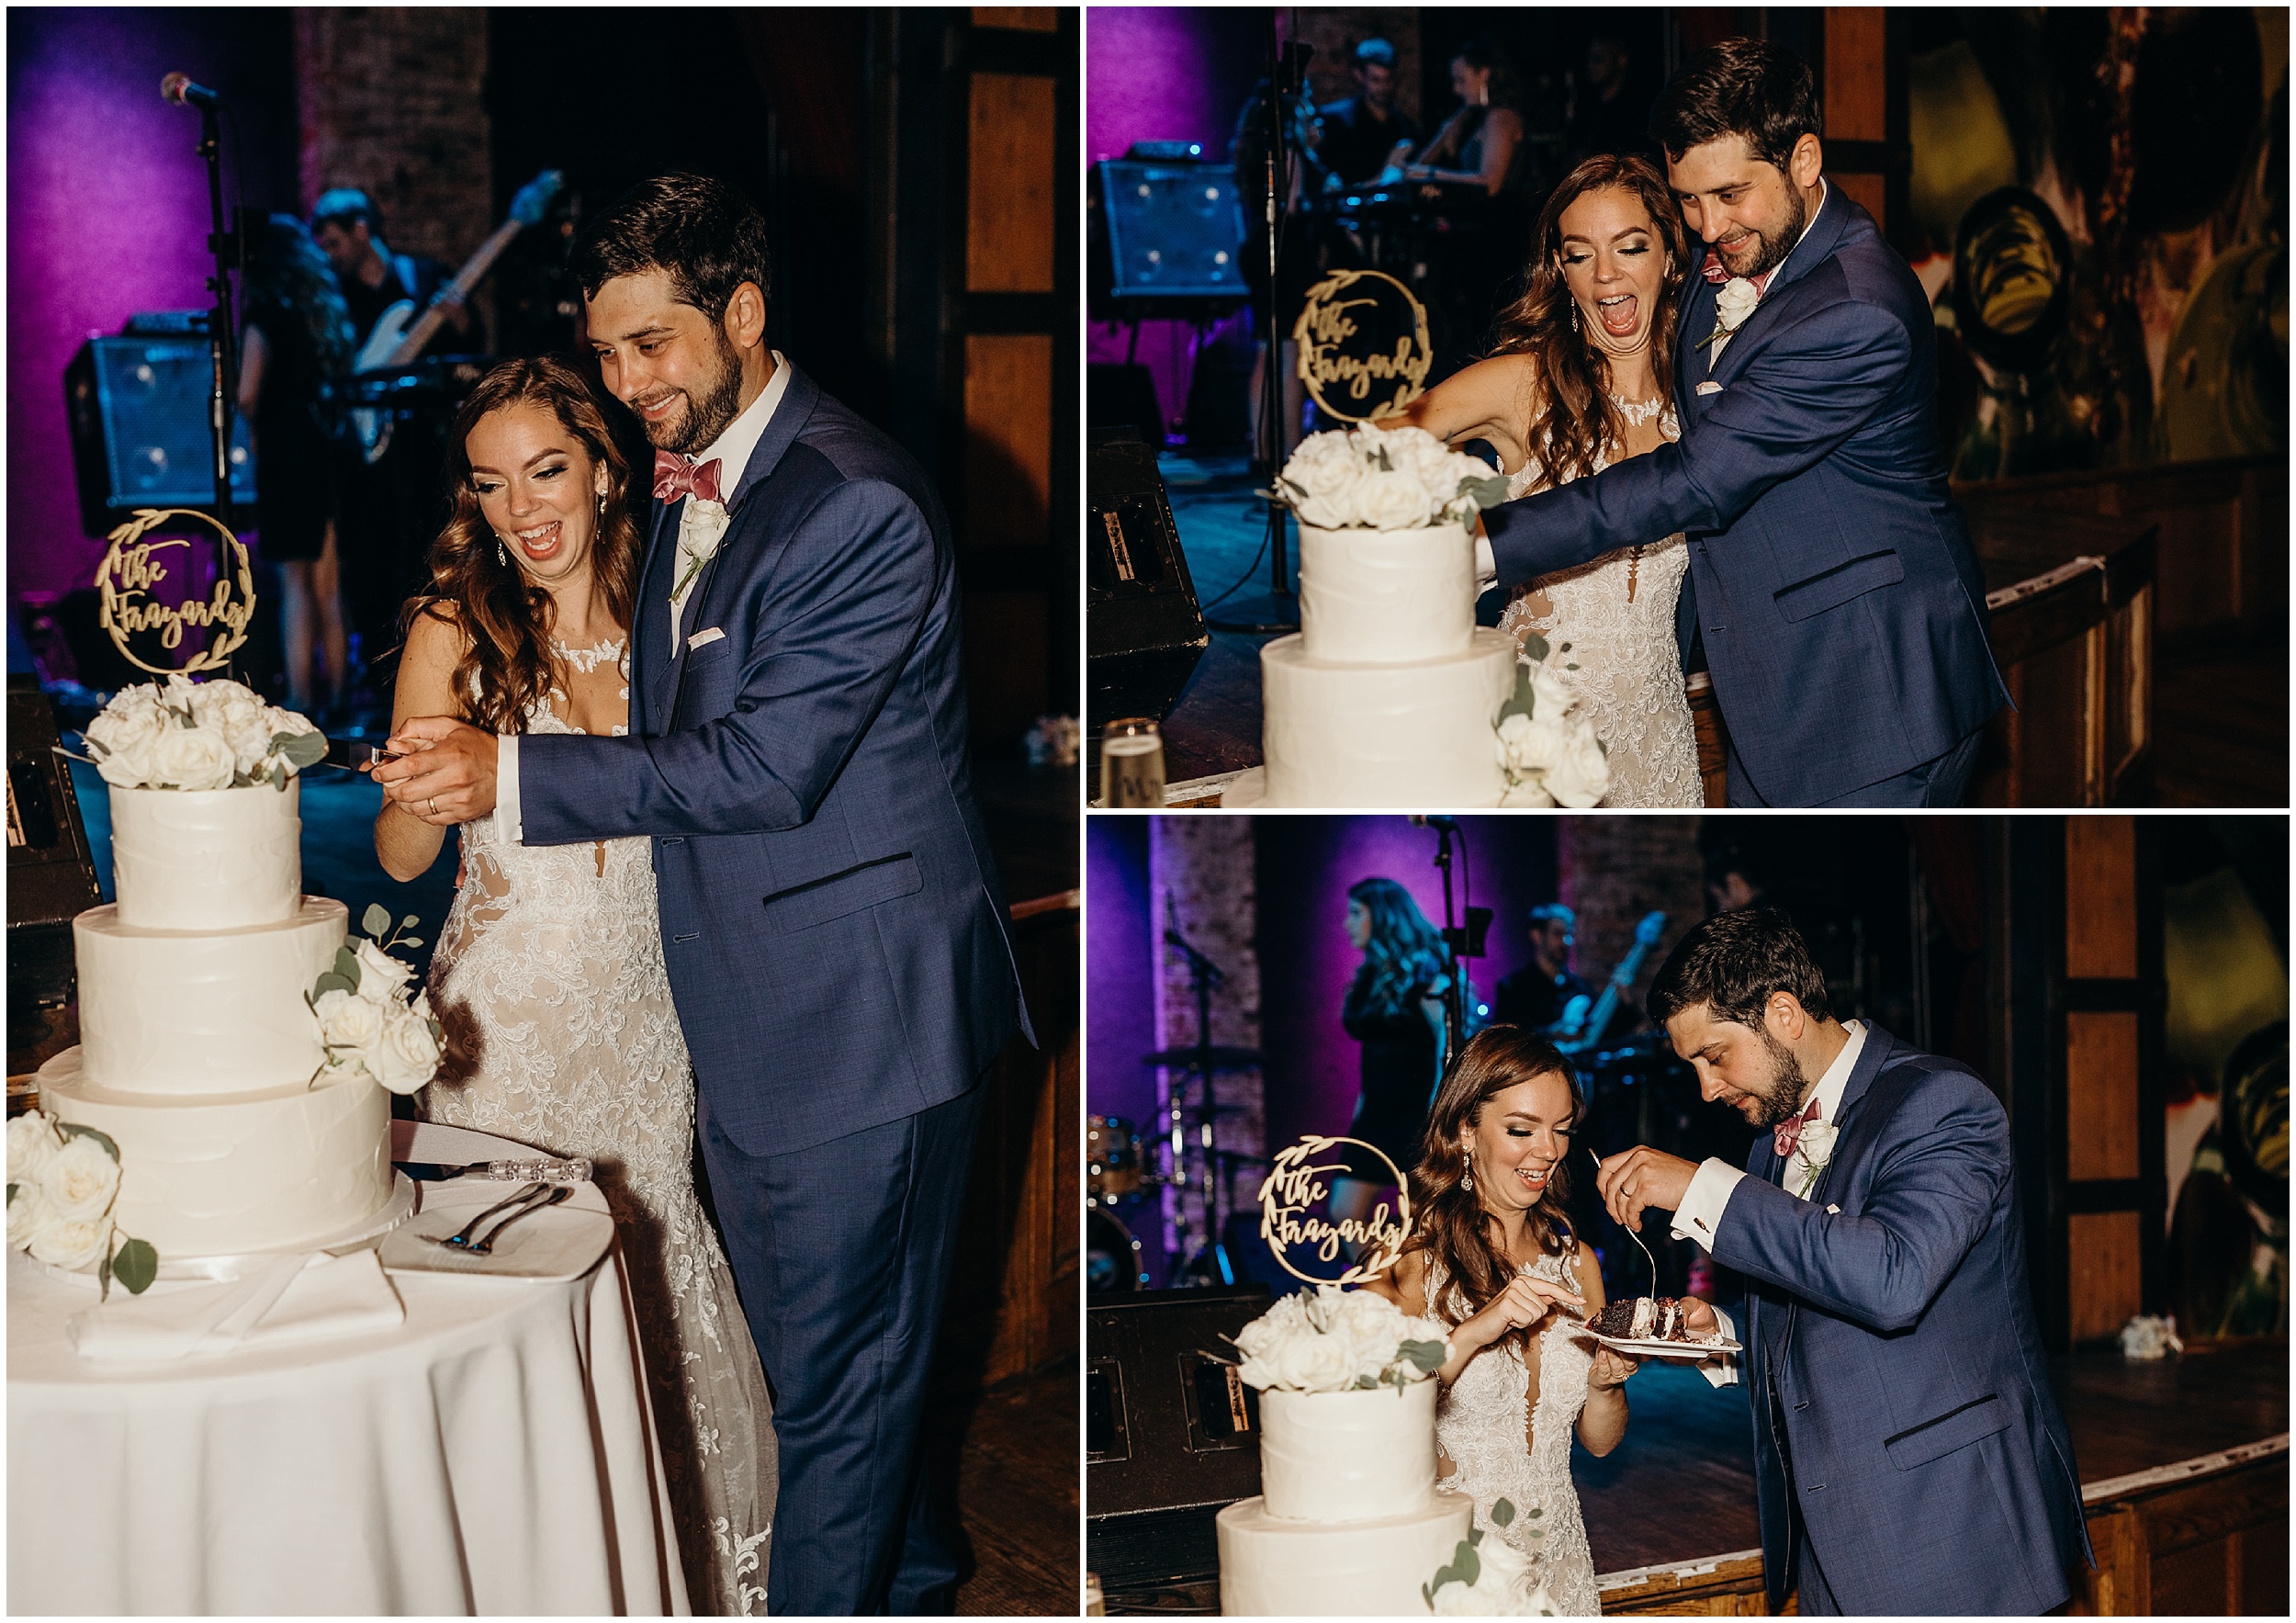 a bride and groom cut their wedding cake at city winery in new york city, new york